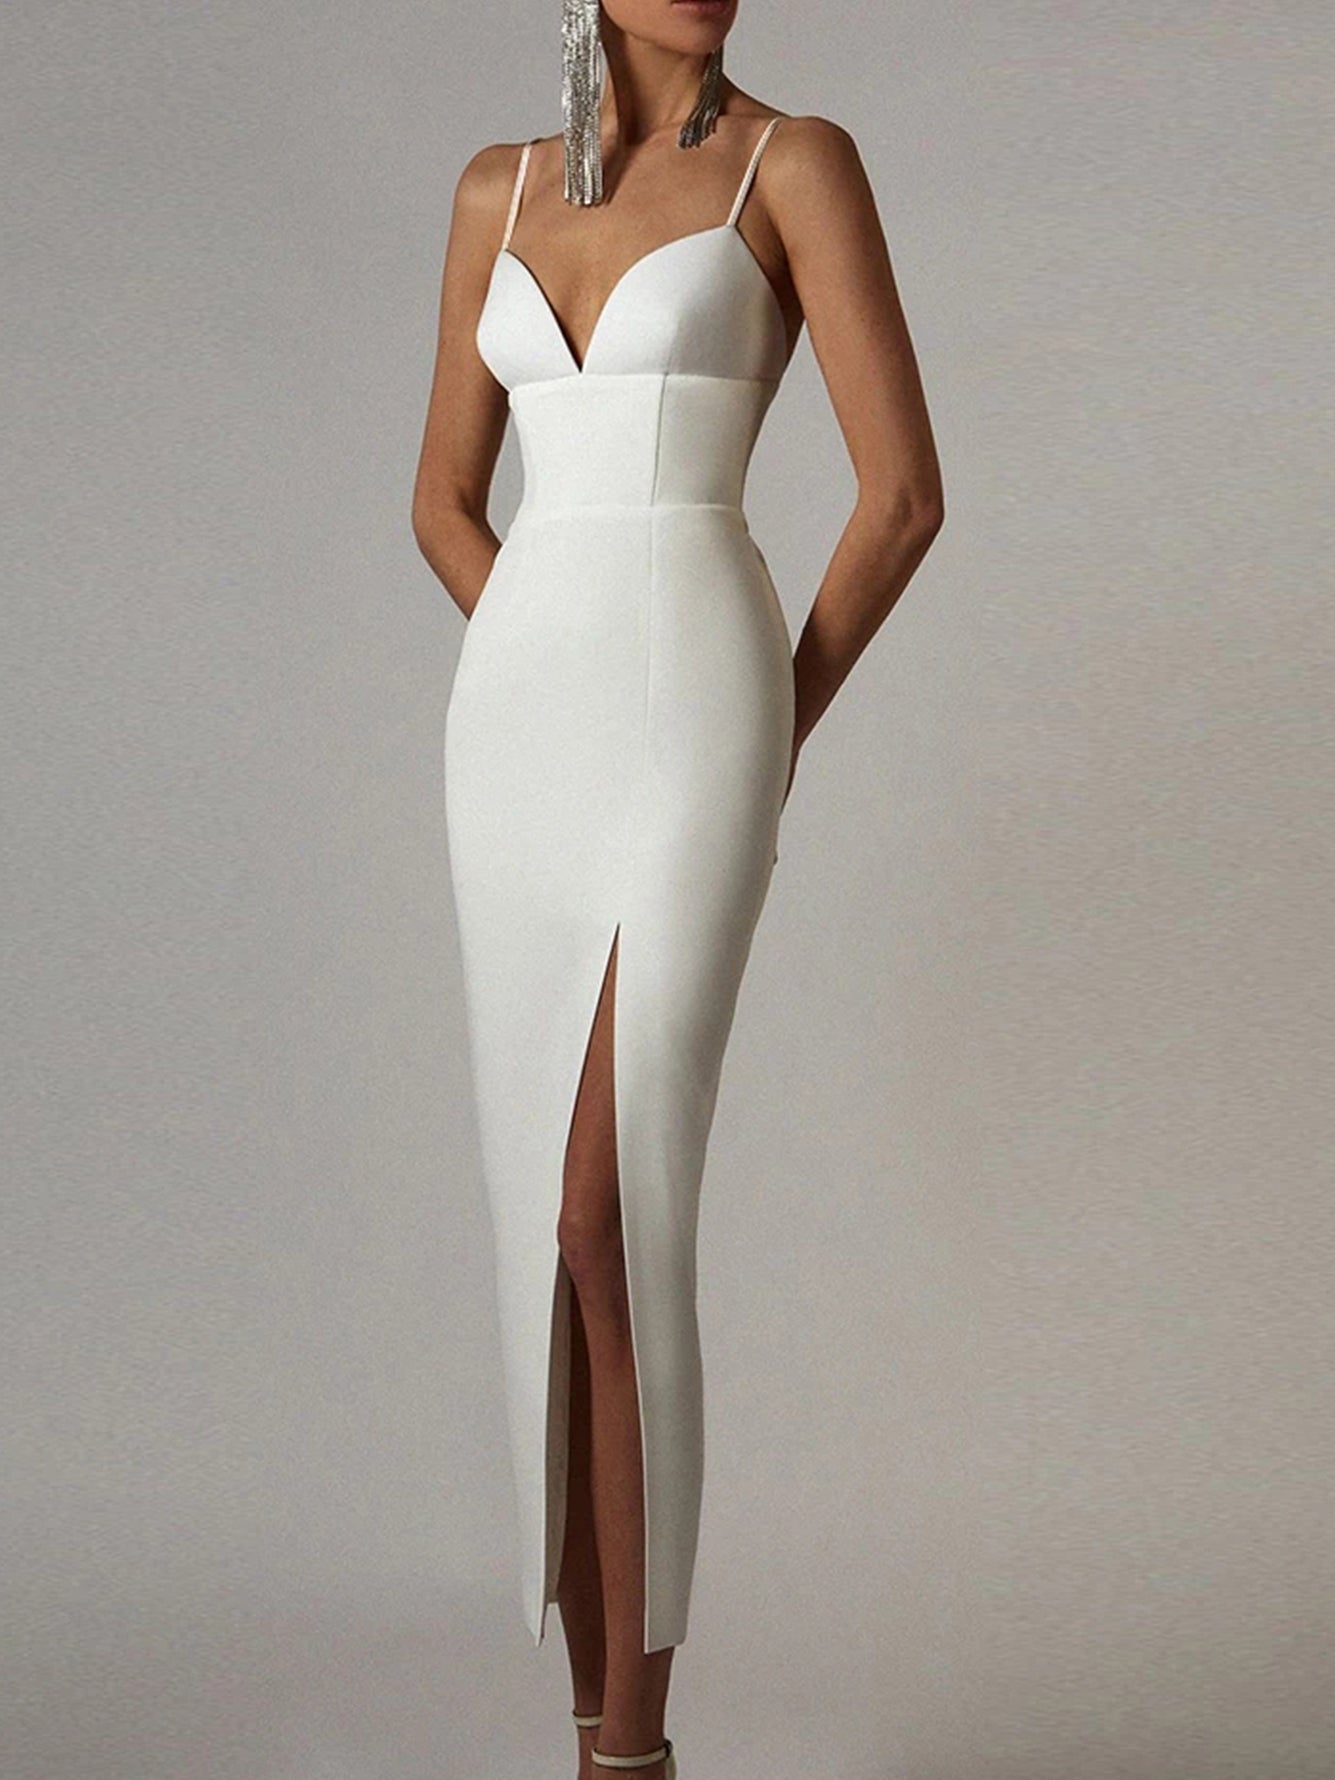 Classy Angel New Summer Women White Bodycon Bandage Dress Sexy V Neck Spaghetti Strap Club Celebrity Evening Runway Party Long Dresses - The Vertus Boutique 